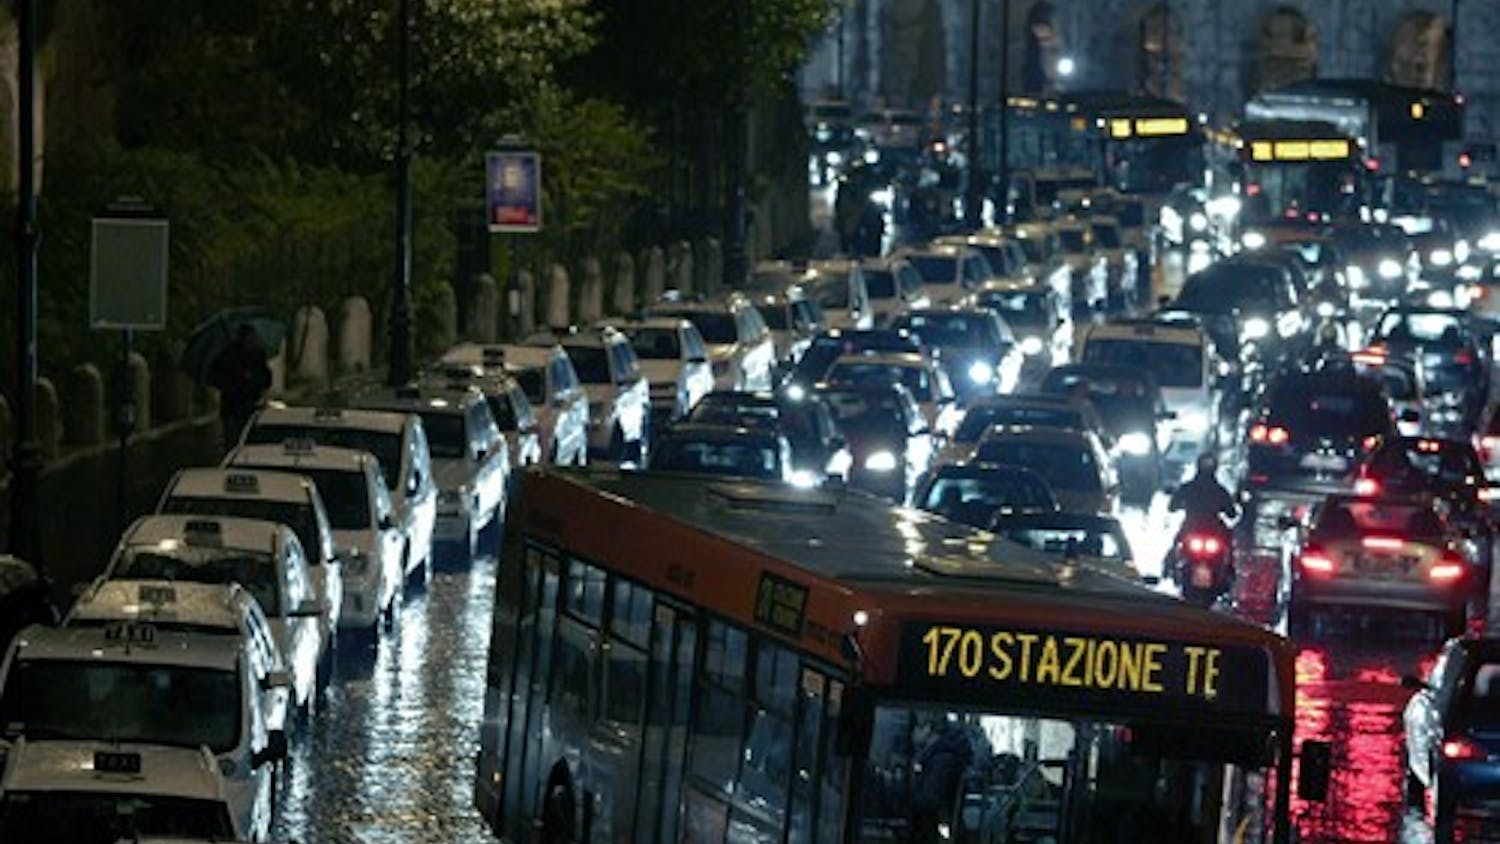 ITALY TAXI PROTEST